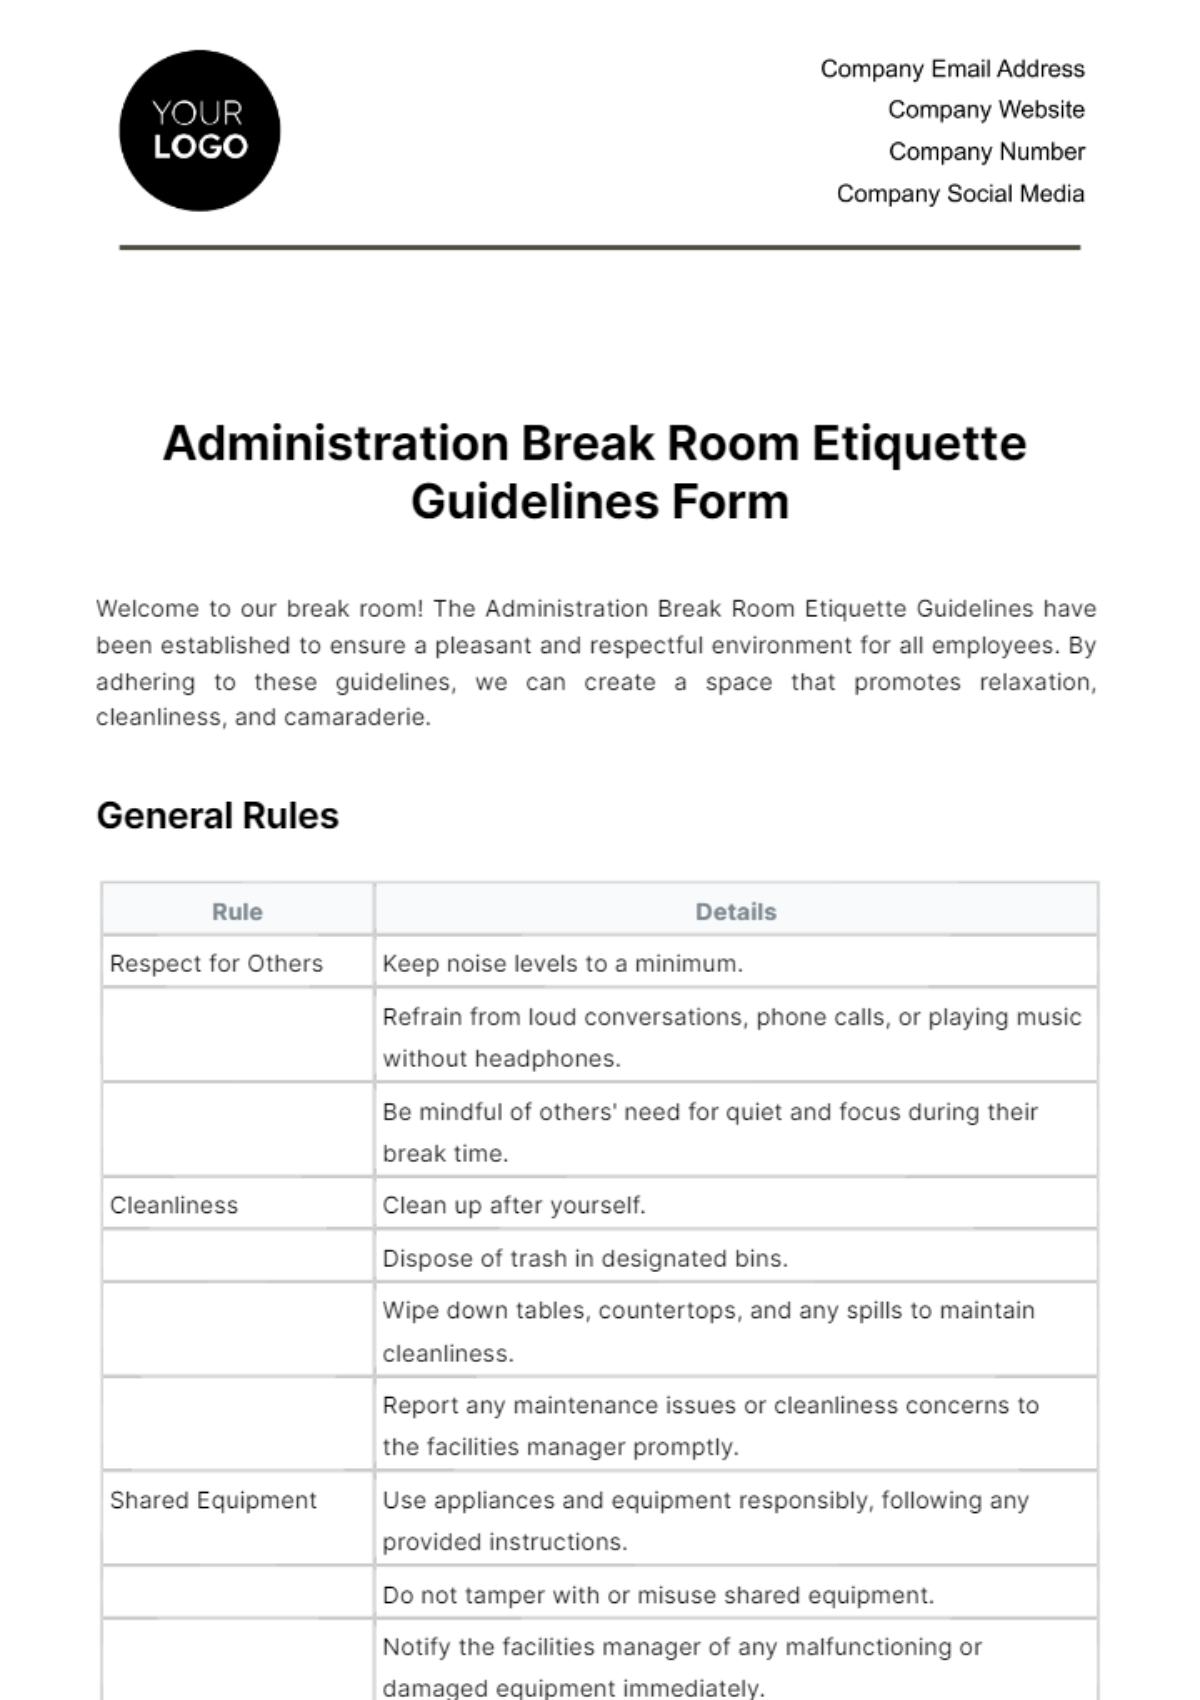 Free Administration Break Room Etiquette Guidelines Form Template